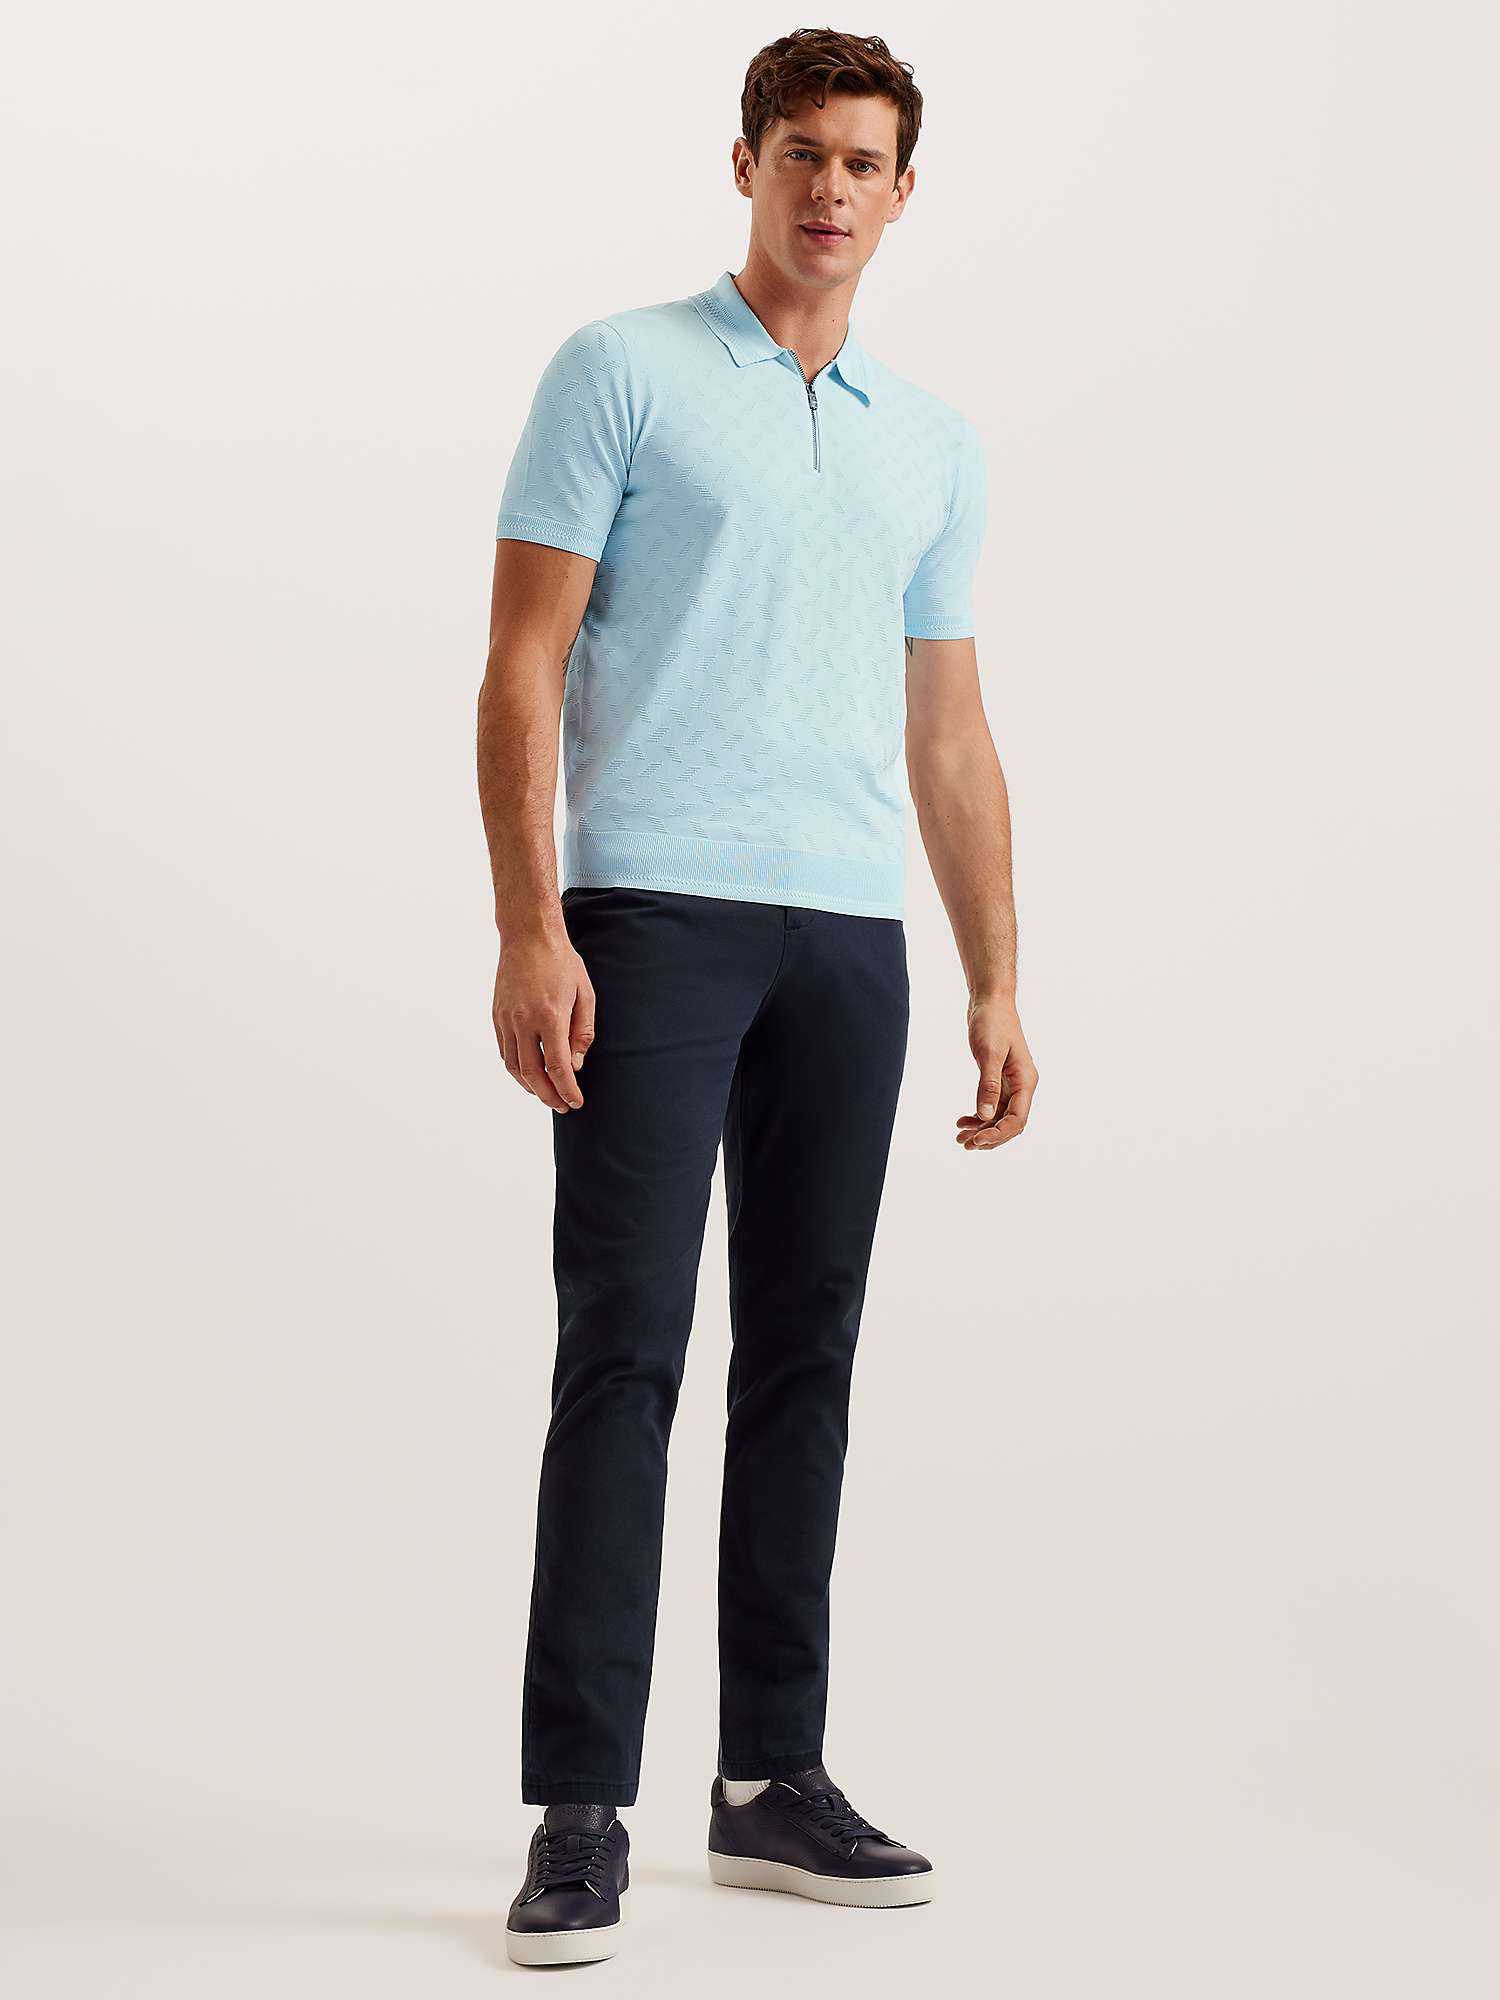 Buy Ted Baker Palton Textured Zipped Polo Shirt Online at johnlewis.com